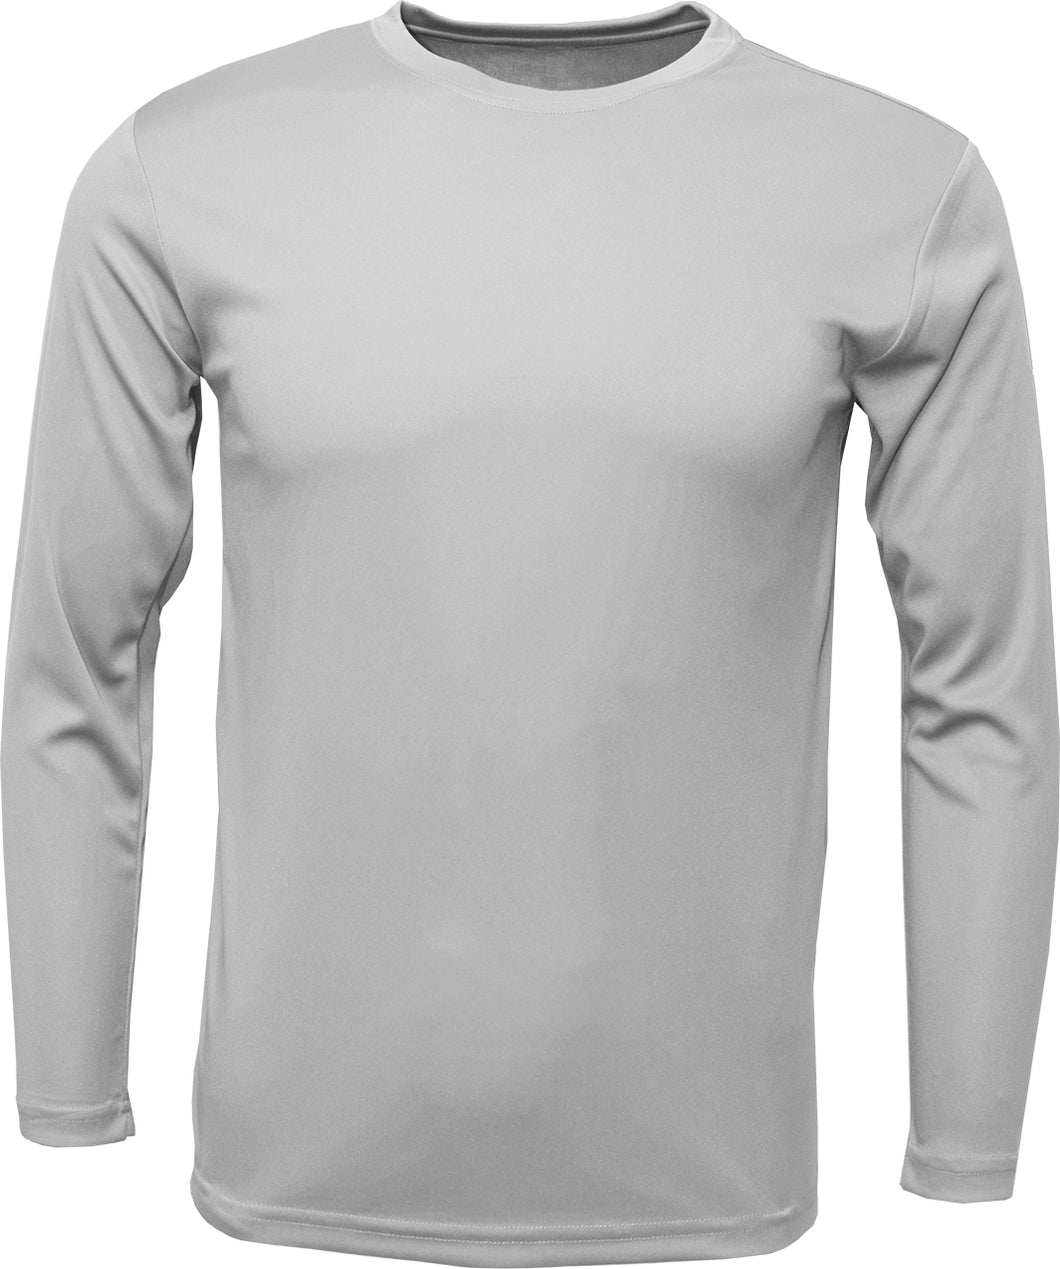 Shooting Shirt (Required)